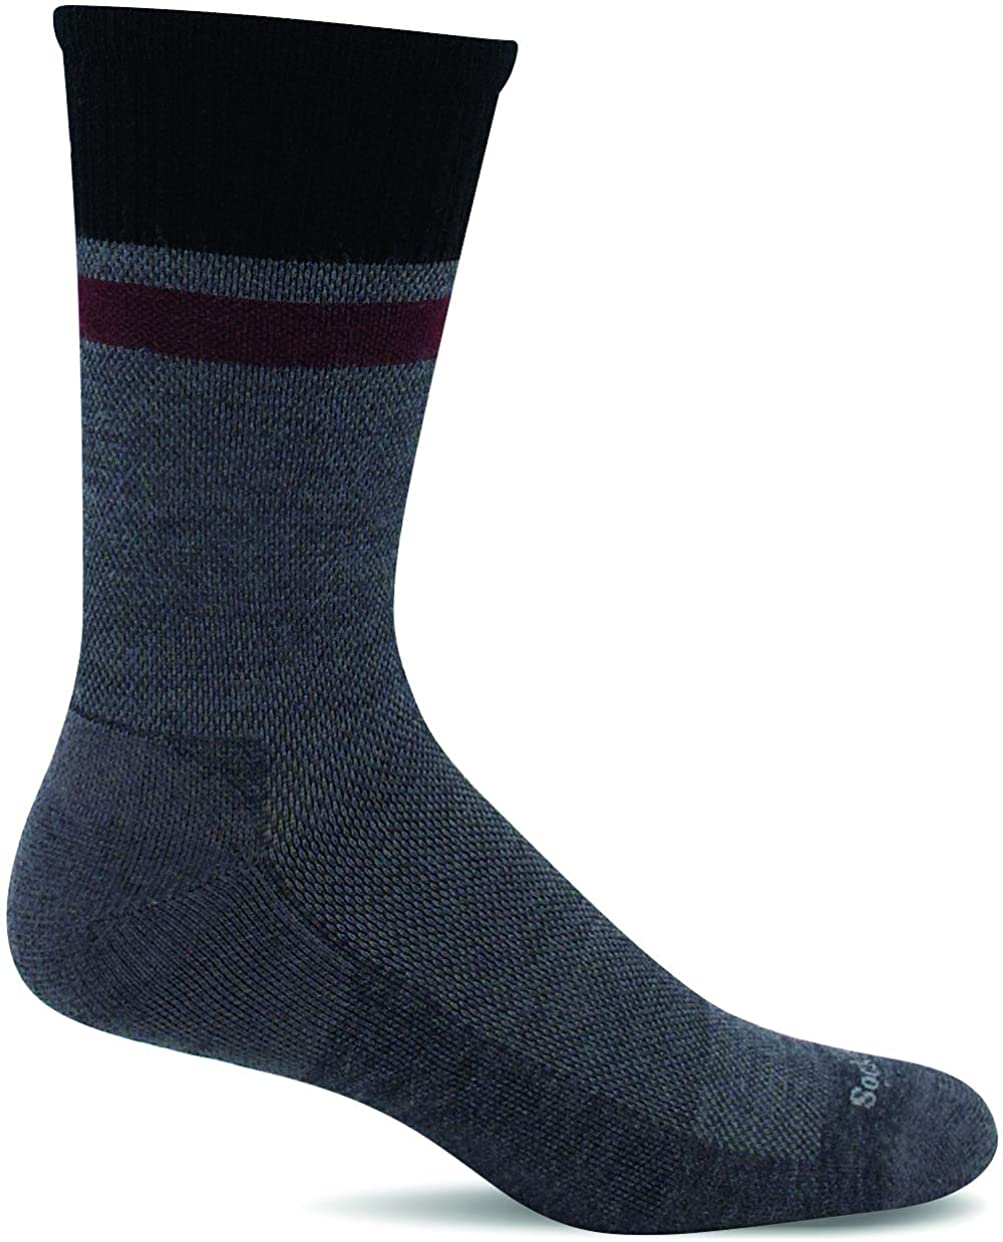 Sockwell Men's Foothold Crew Moderate Graduated Compression Sock in Charcoal from the side